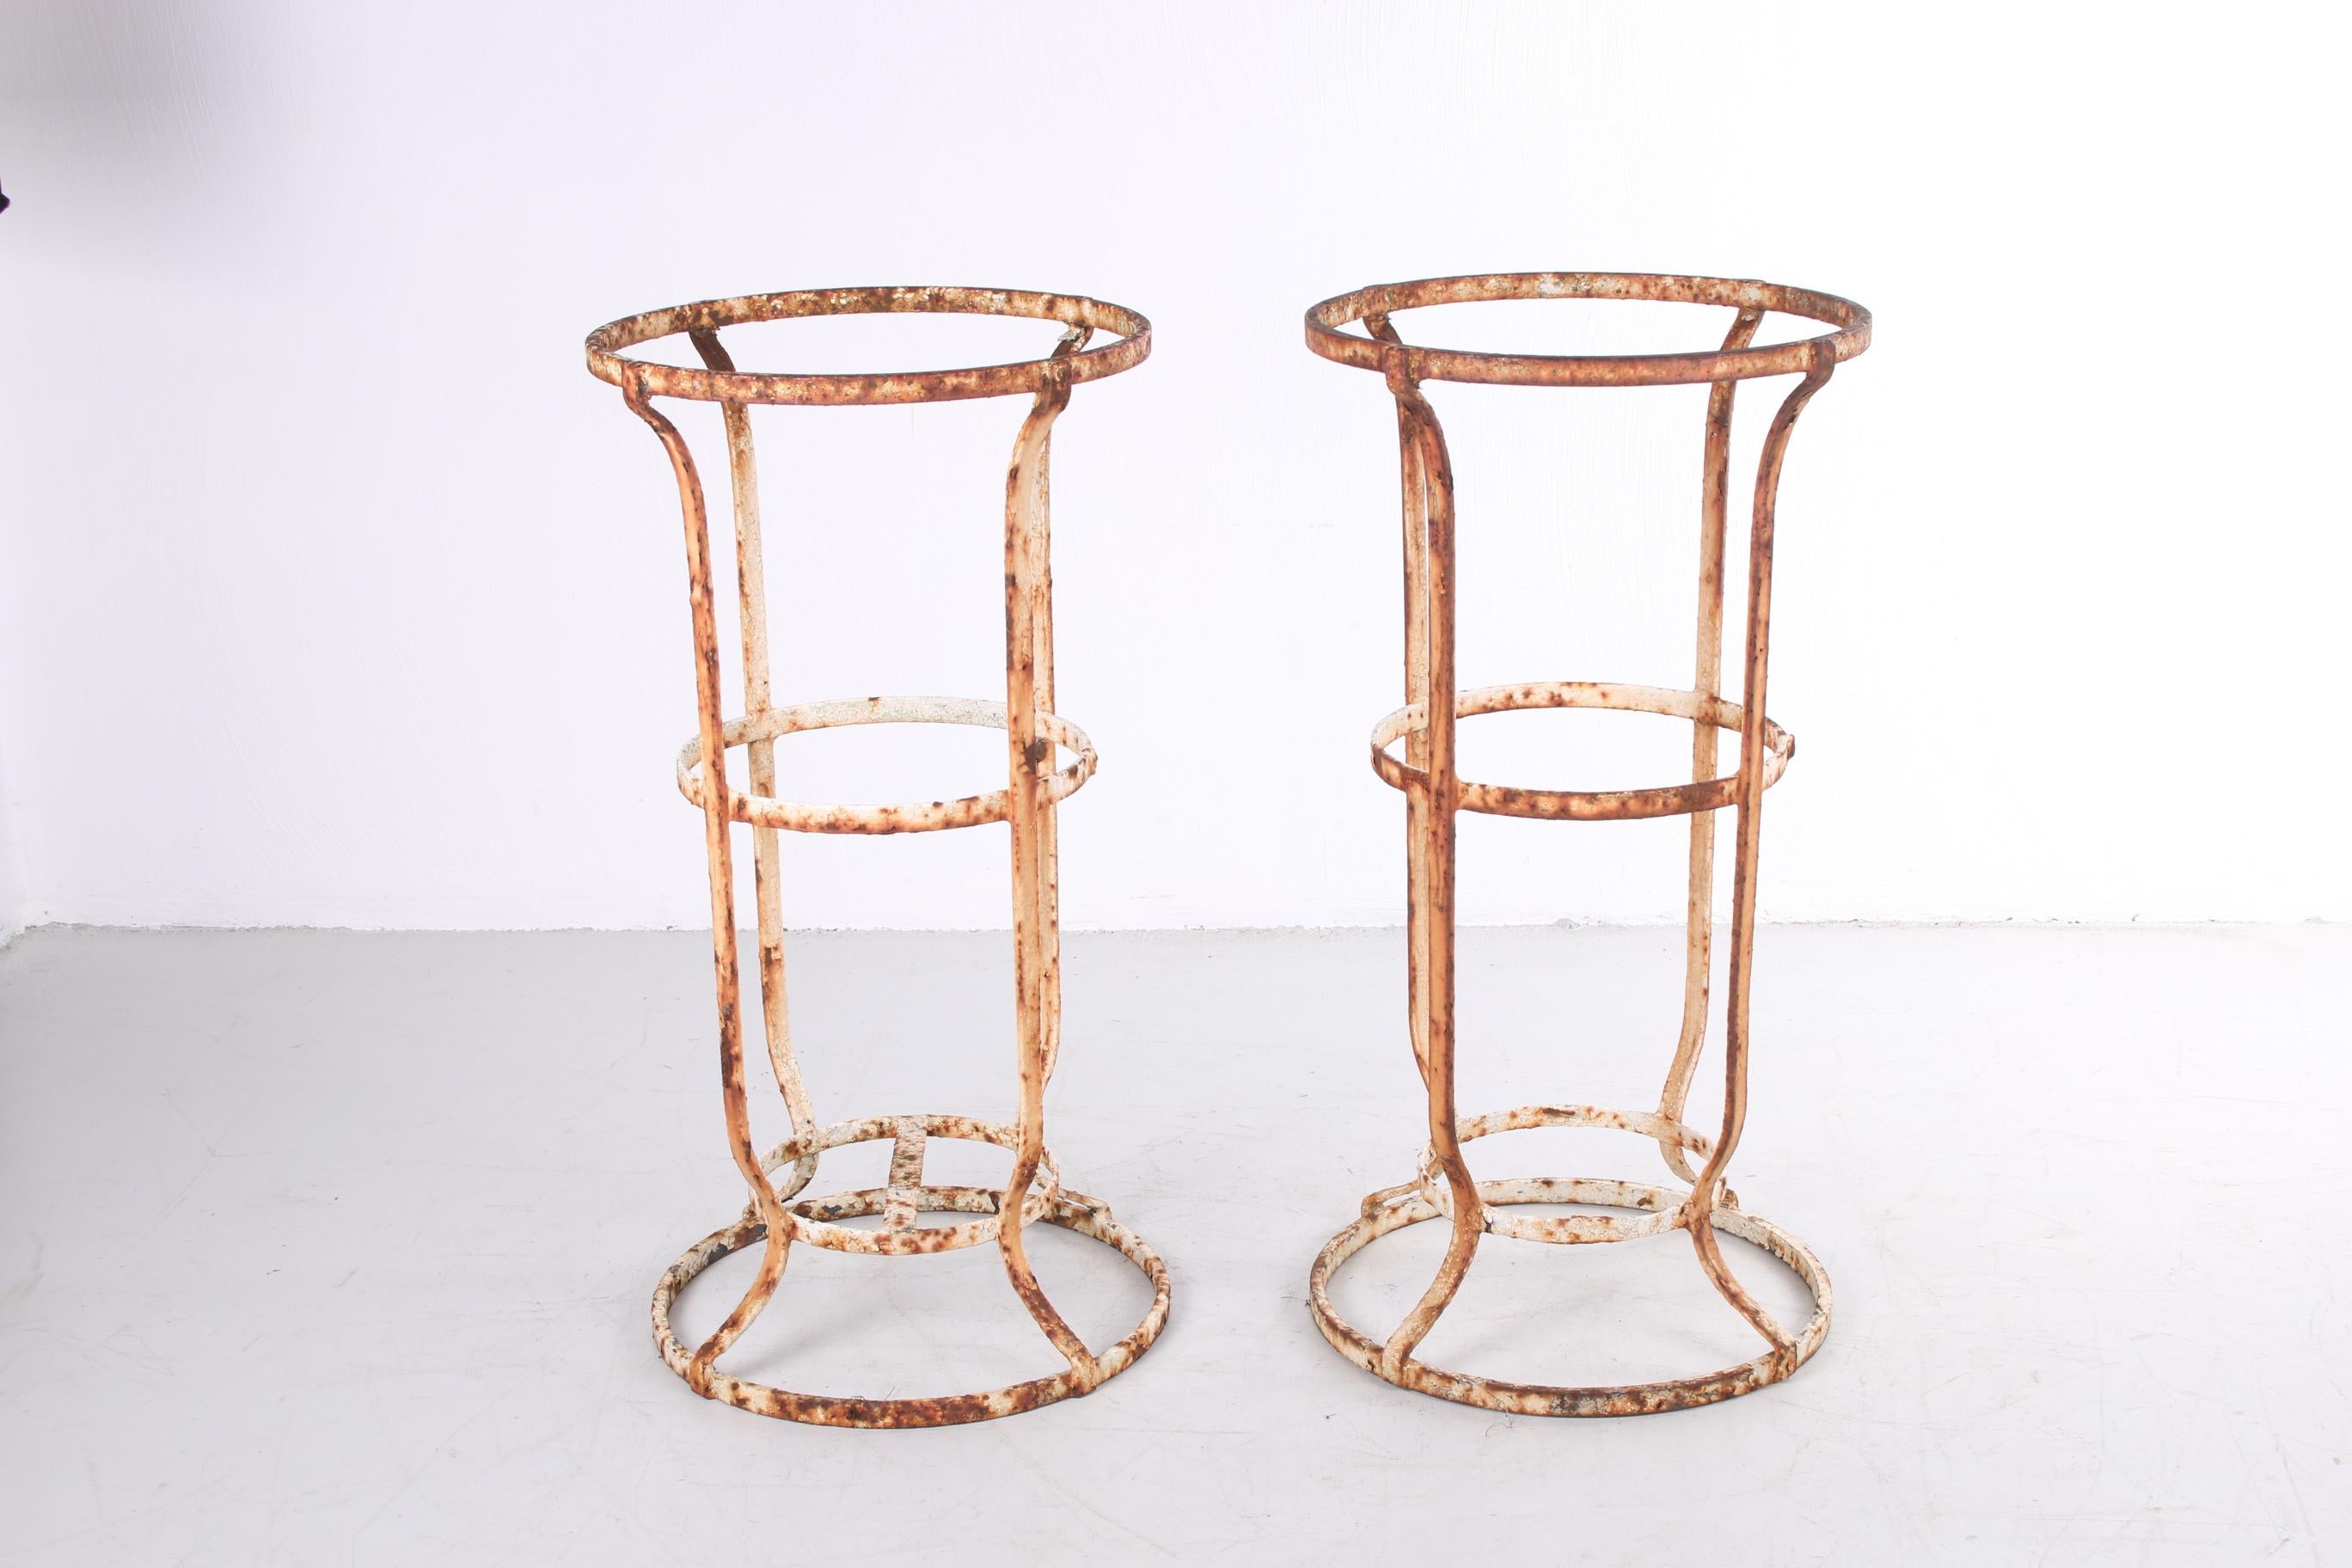 Very Old Wrought Iron French Garden Stand, a Set of 2 with Beautiful Patina For Sale 4